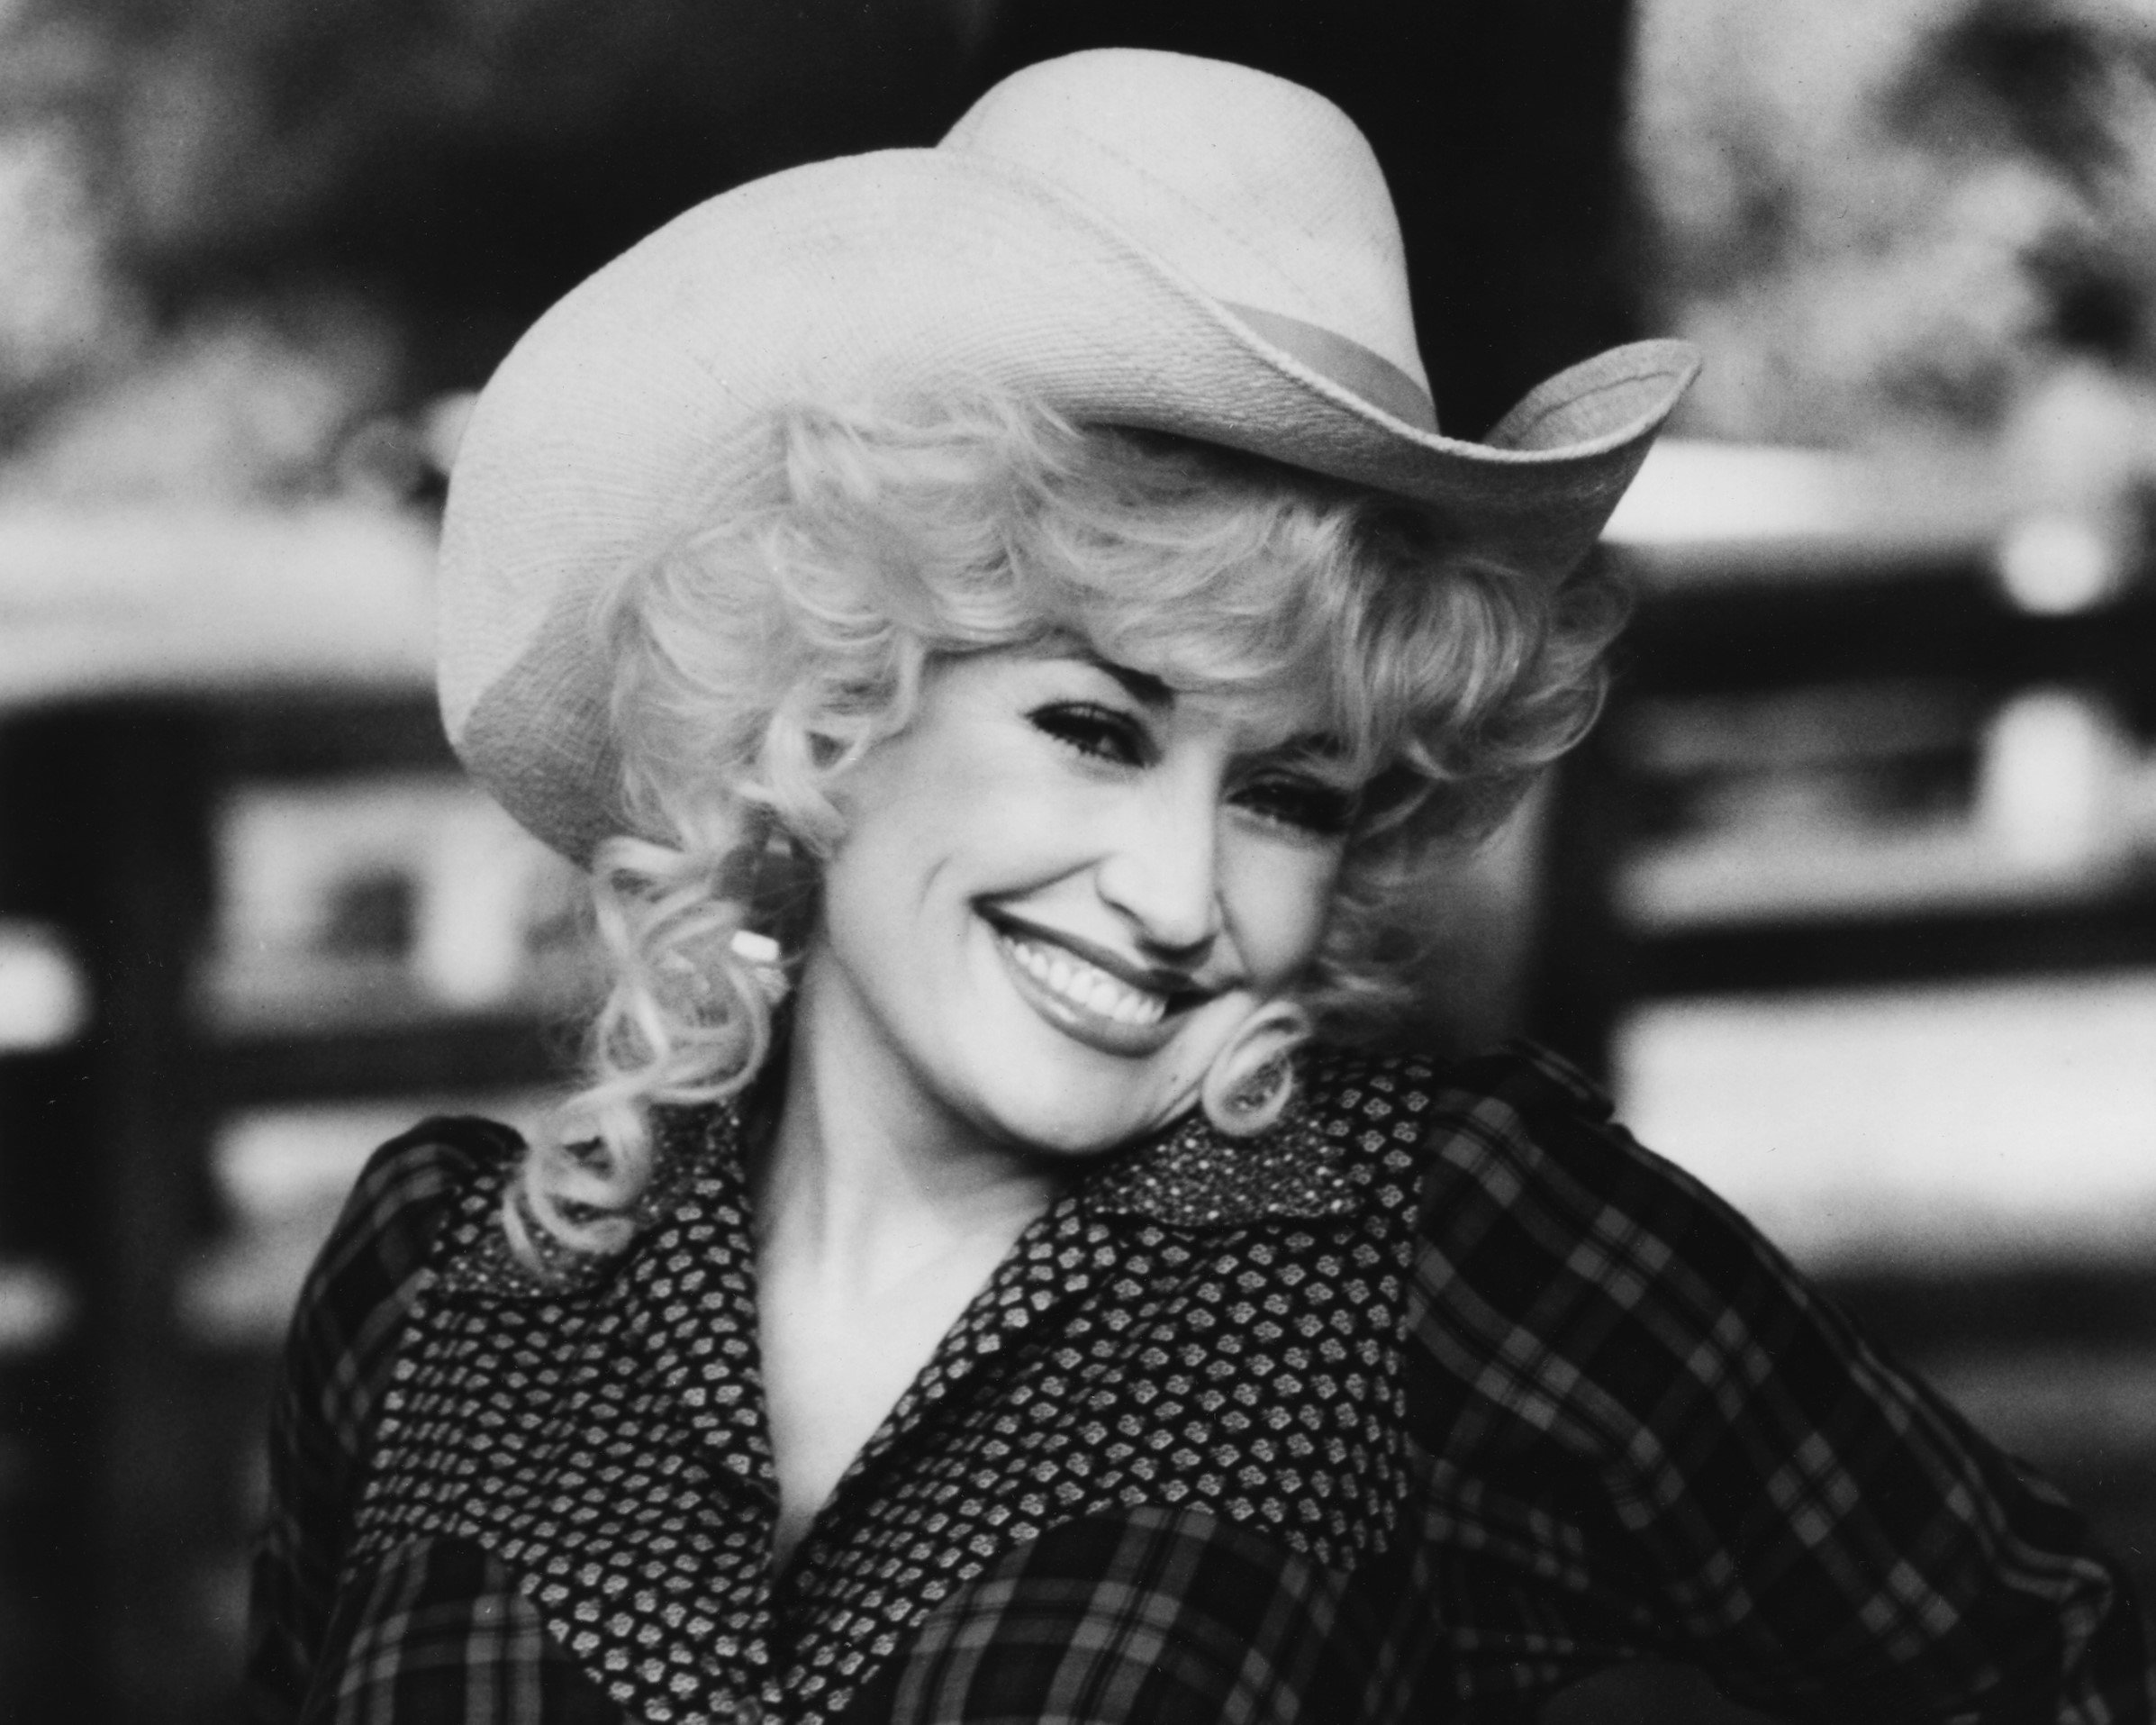 Dolly Parton, who got her start in Nashville, smiles while wearing a cowboy hat.